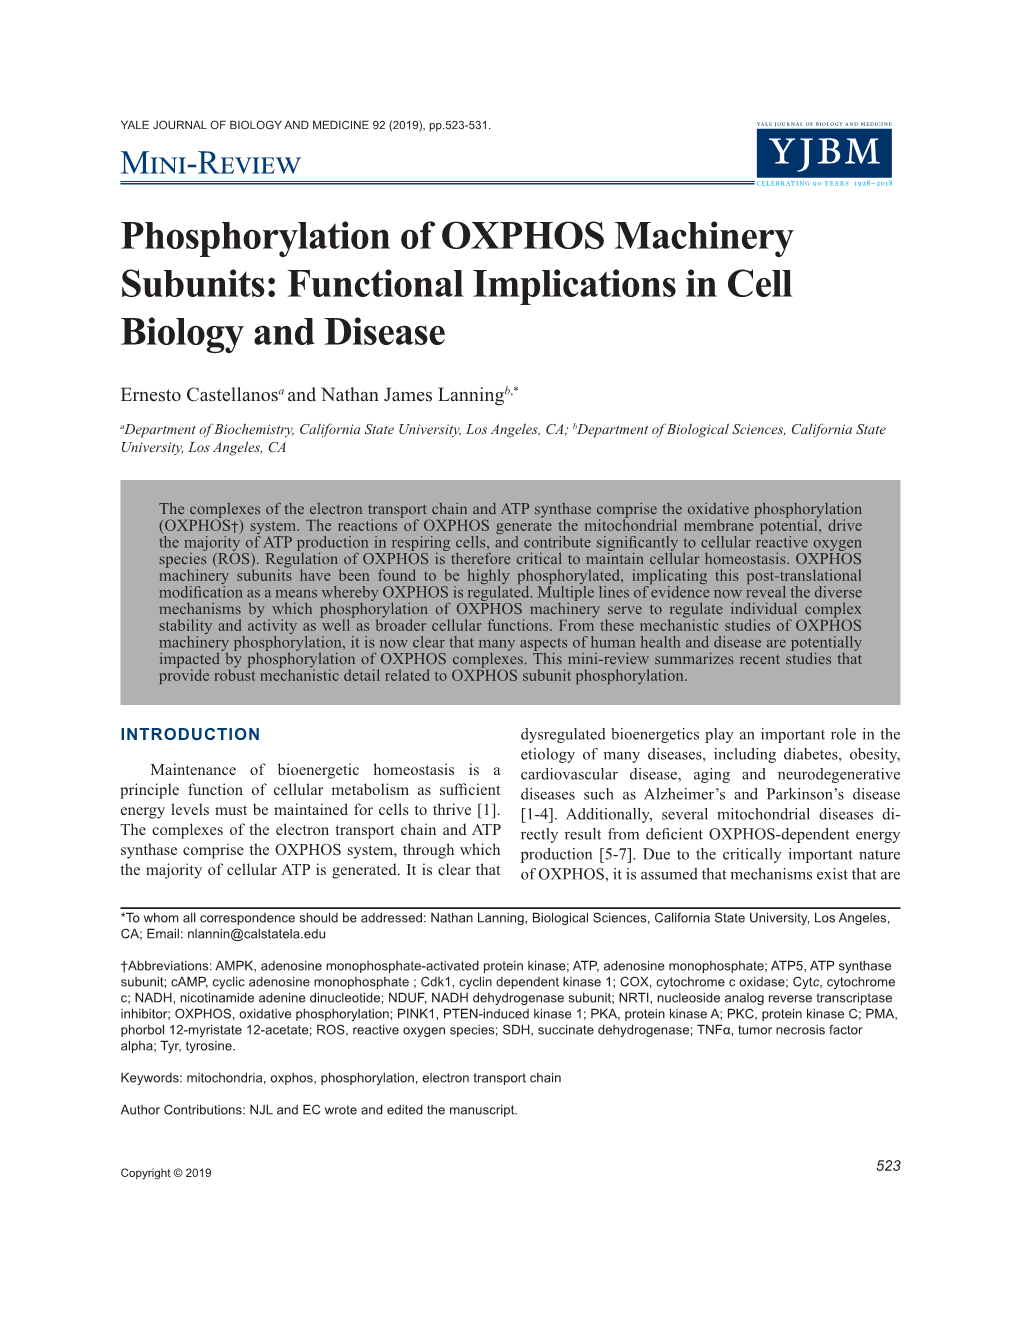 Mini-Review Phosphorylation of OXPHOS Machinery Subunits: Functional Implications in Cell Biology and Disease